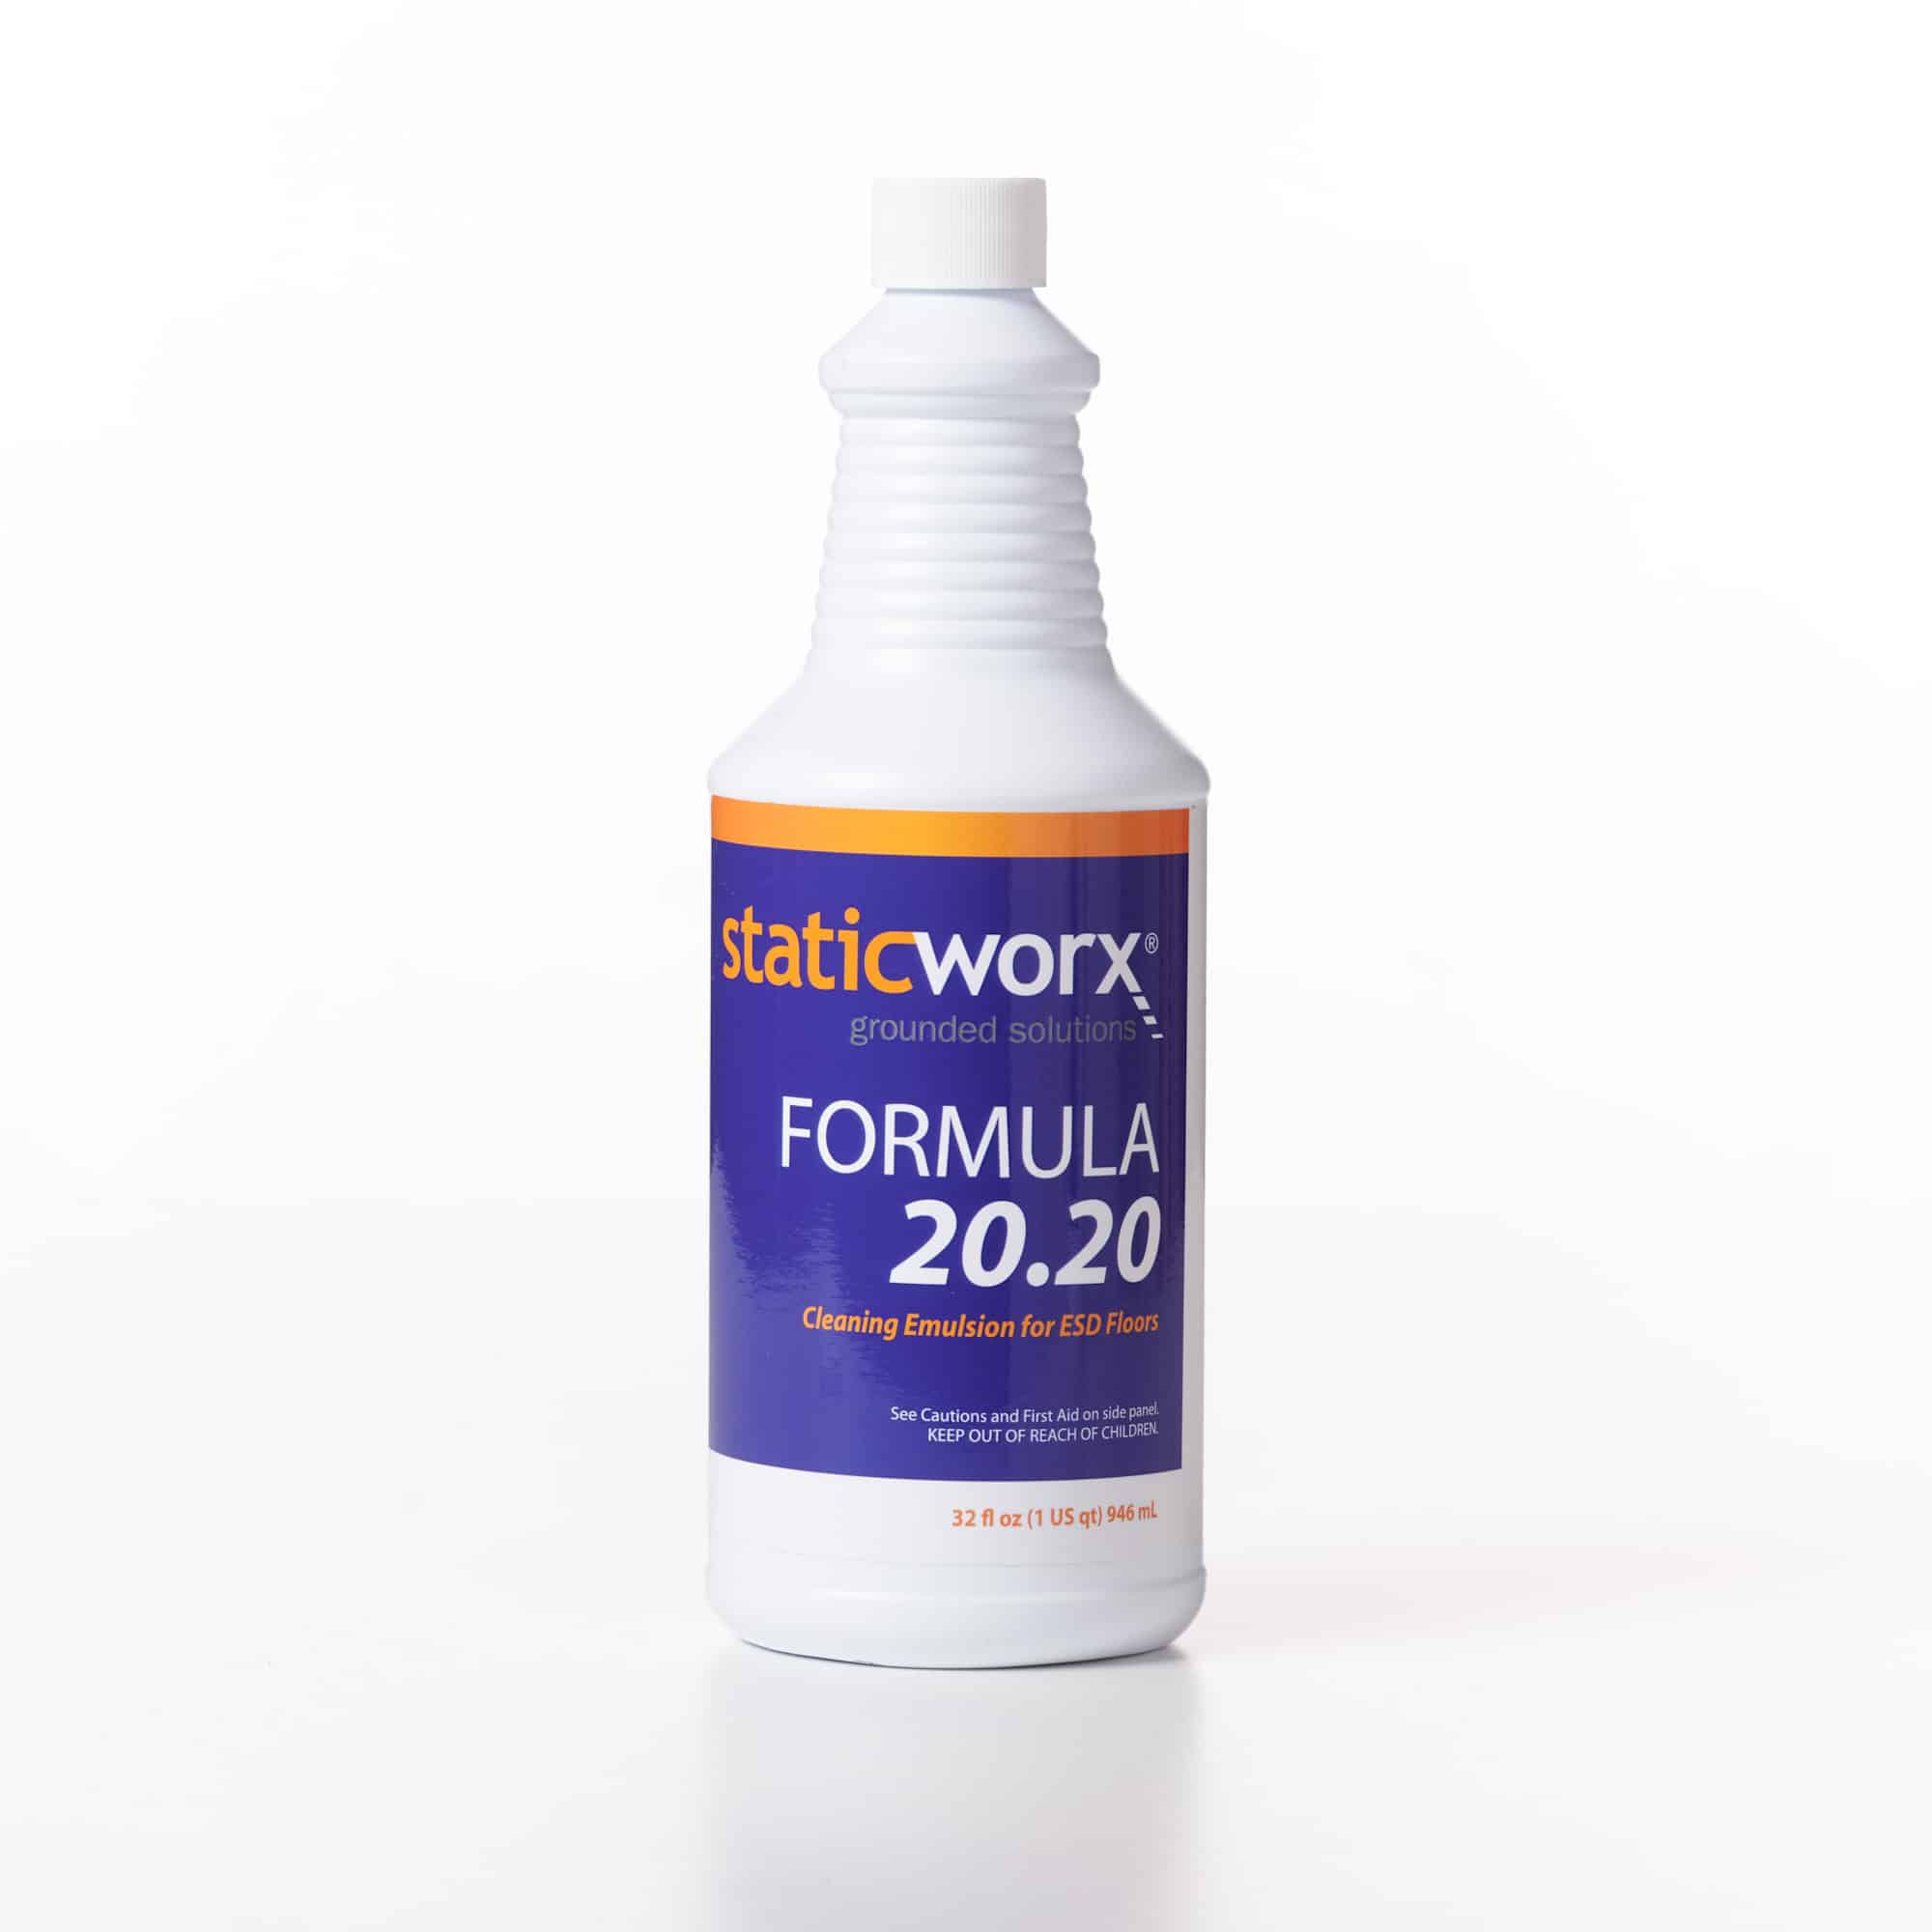 Photo of a screw-top bottle of Formula 20.20 cleaning emulsion. The white bottle has a blue label with orange trim on the top and the StaticWorx logo underneath. Large white text on the label reads FORMULA 20.20. In smaller orange text underneath: 'Cleaning emulsion for ESD floors' with a safety warning in white, smaller text underneath: "See Cautions and First Aid on side panel. KEEP OUT OF REACH OF CHILDREN."